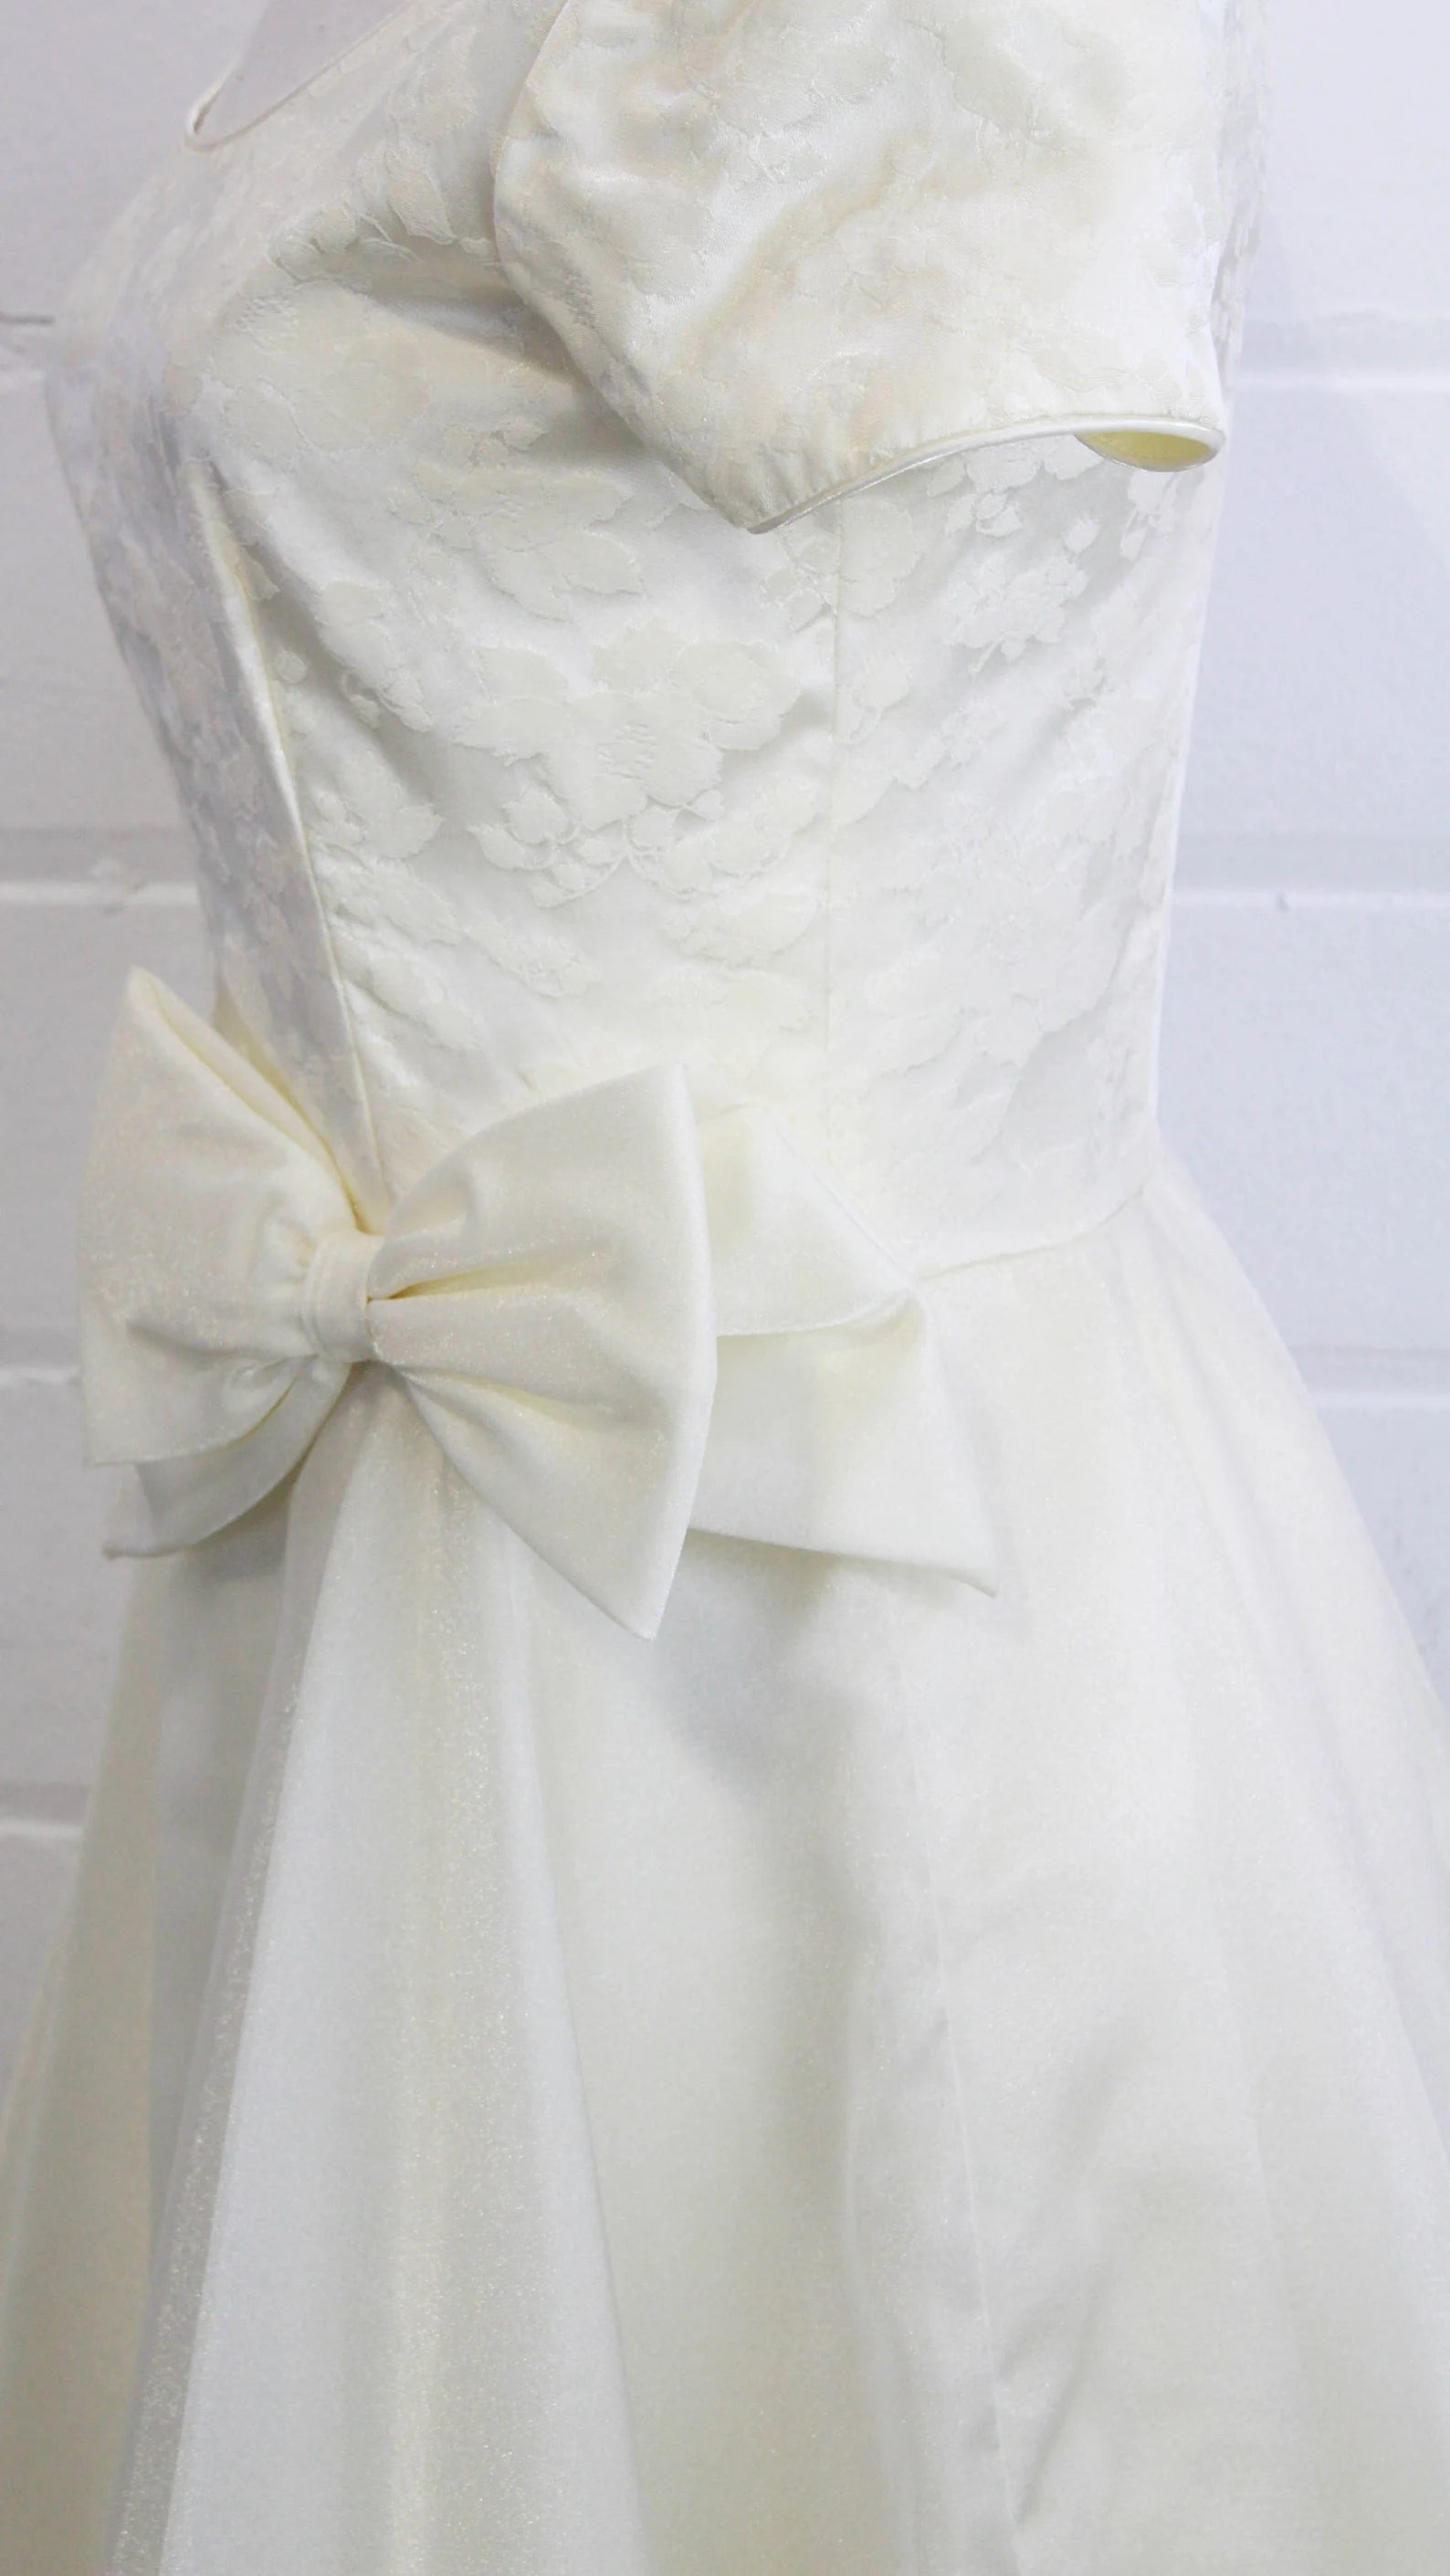 Vintage 90s does 50s White Formal Dress, Small, Full Skirt, Sparkly Organza Wedding Dress